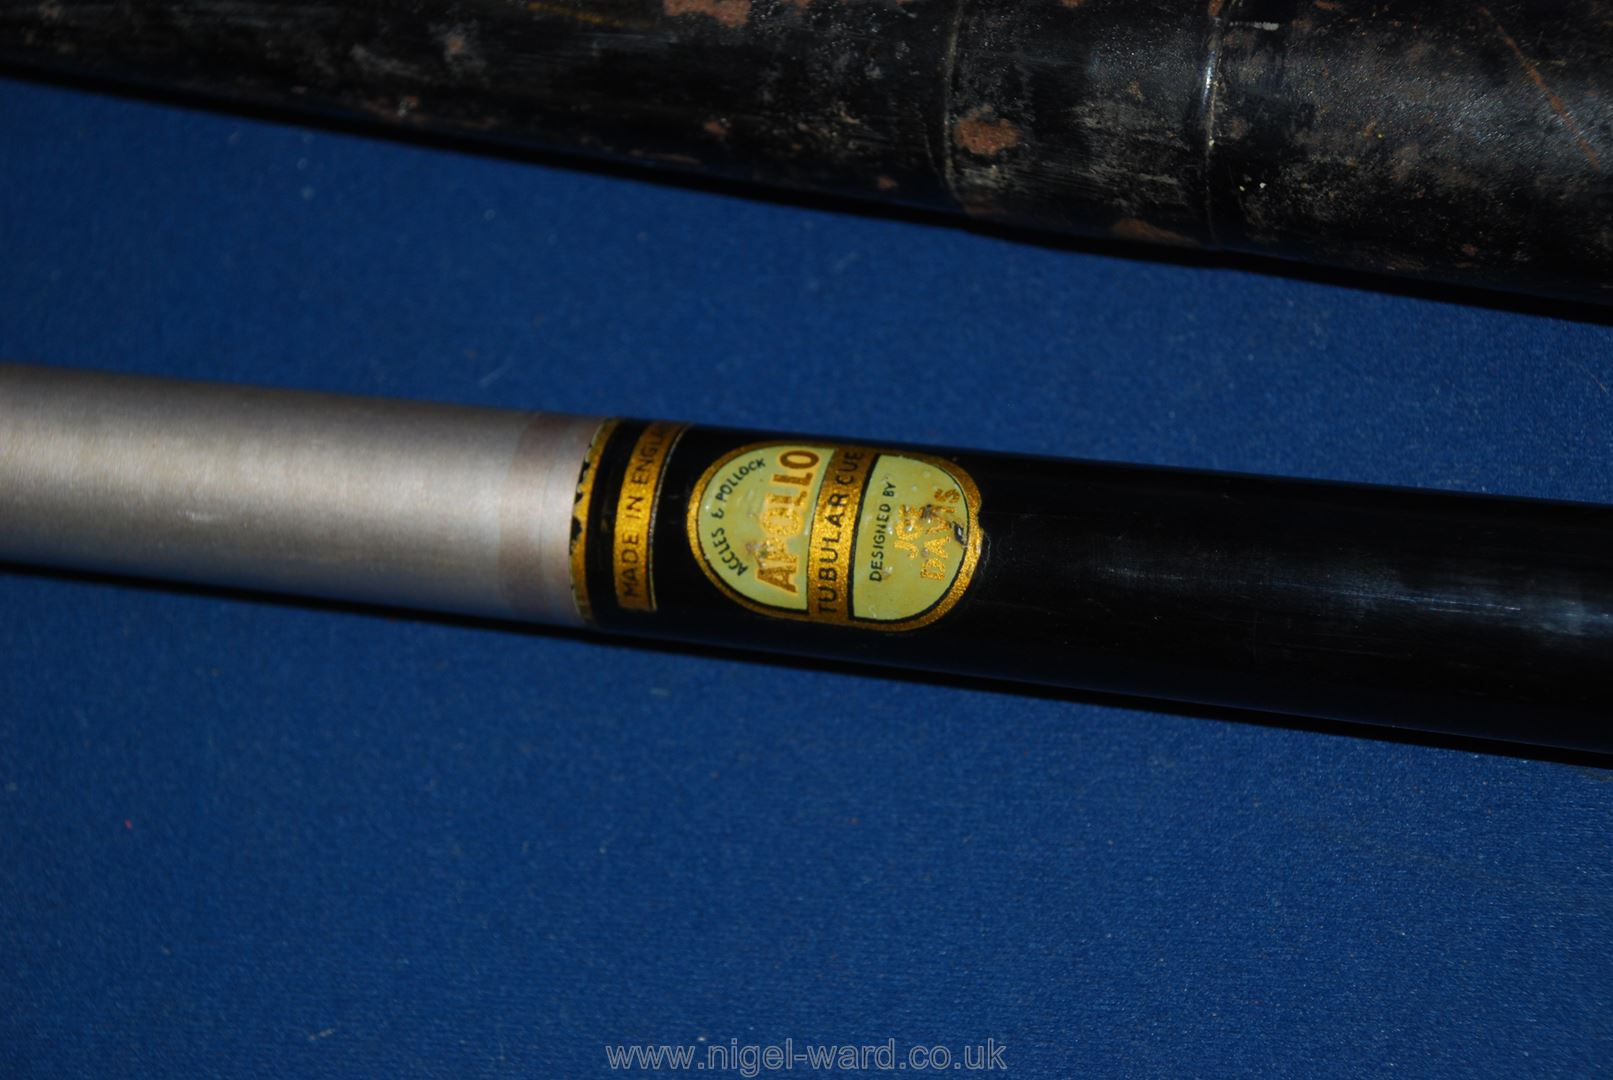 An English made Tubular Cue by Apollo Accles and Pollock in a metal sleeve. - Image 2 of 2